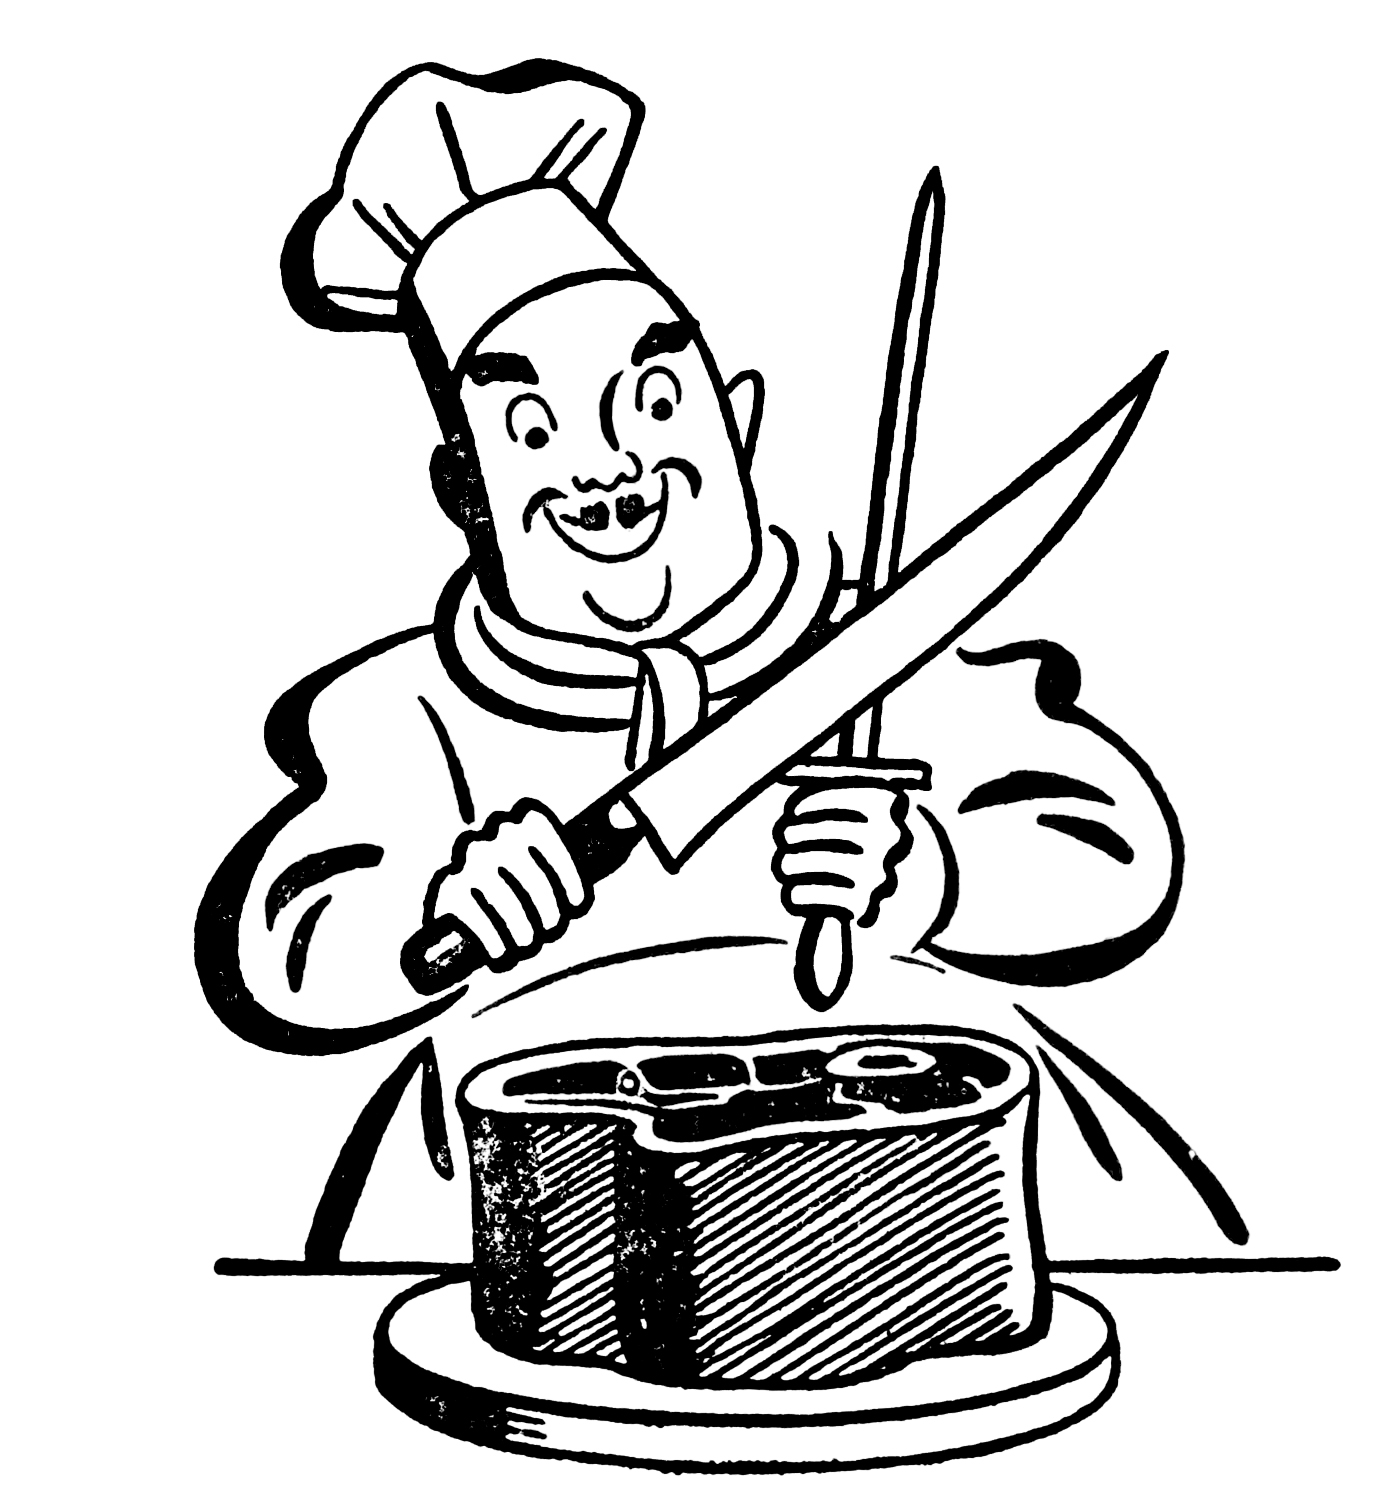 Chinese Food Clipart Chef - Cooking Transparent PNG - 356x635 - Clip ...